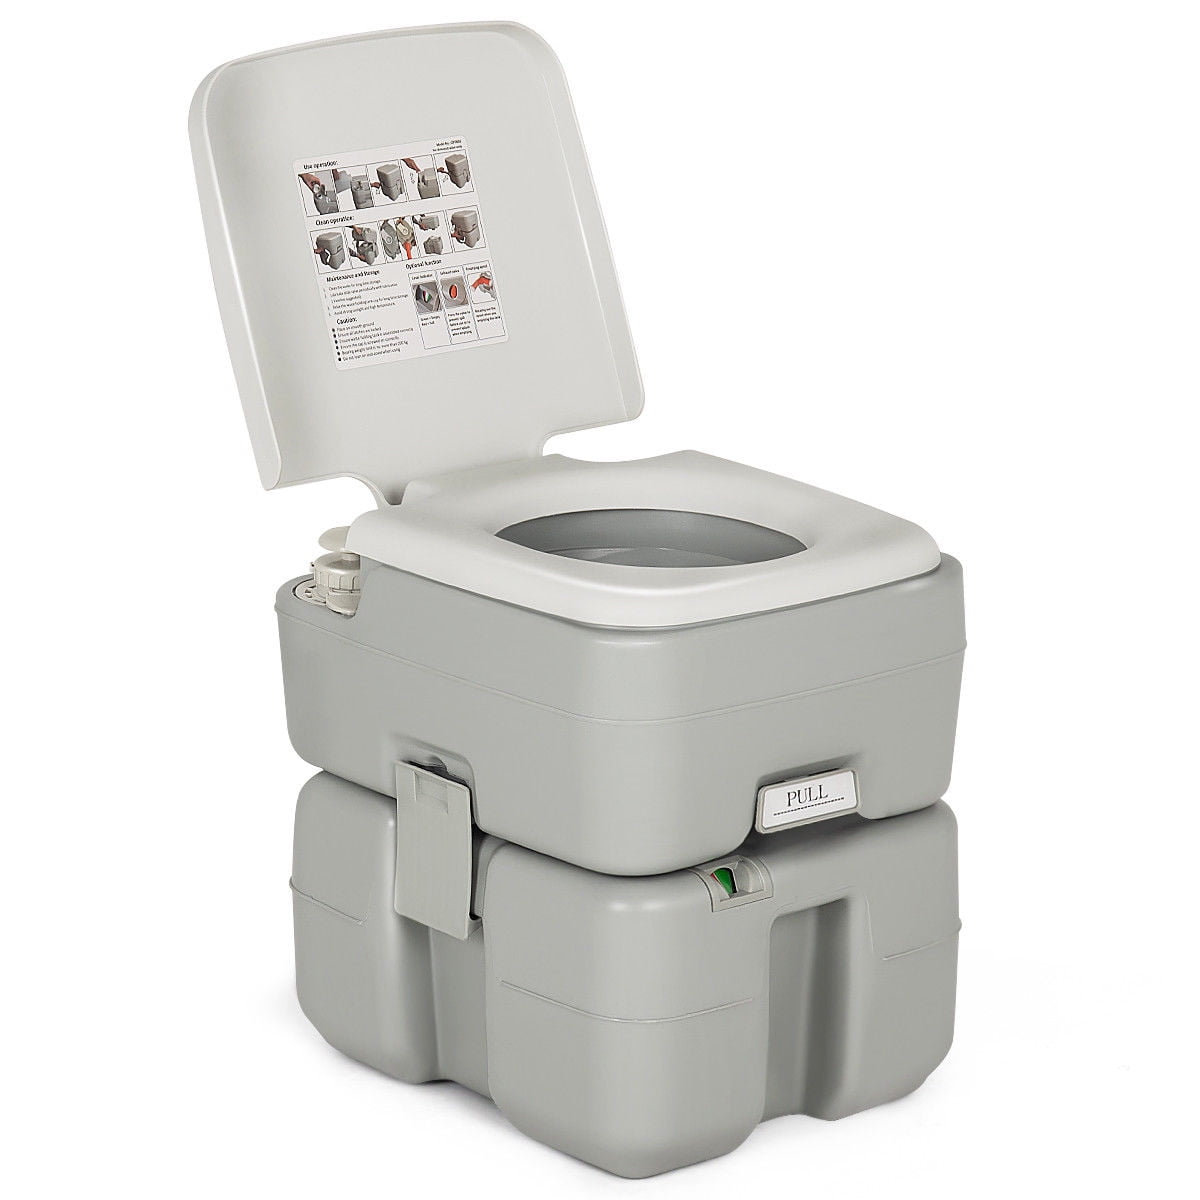 440lbs Heavy Duty RV Toilet for Family Travel Boating Camping GYMAX Portable Toilet 5.3 Gallon Outdoor Porta Potti with Flush Pump 